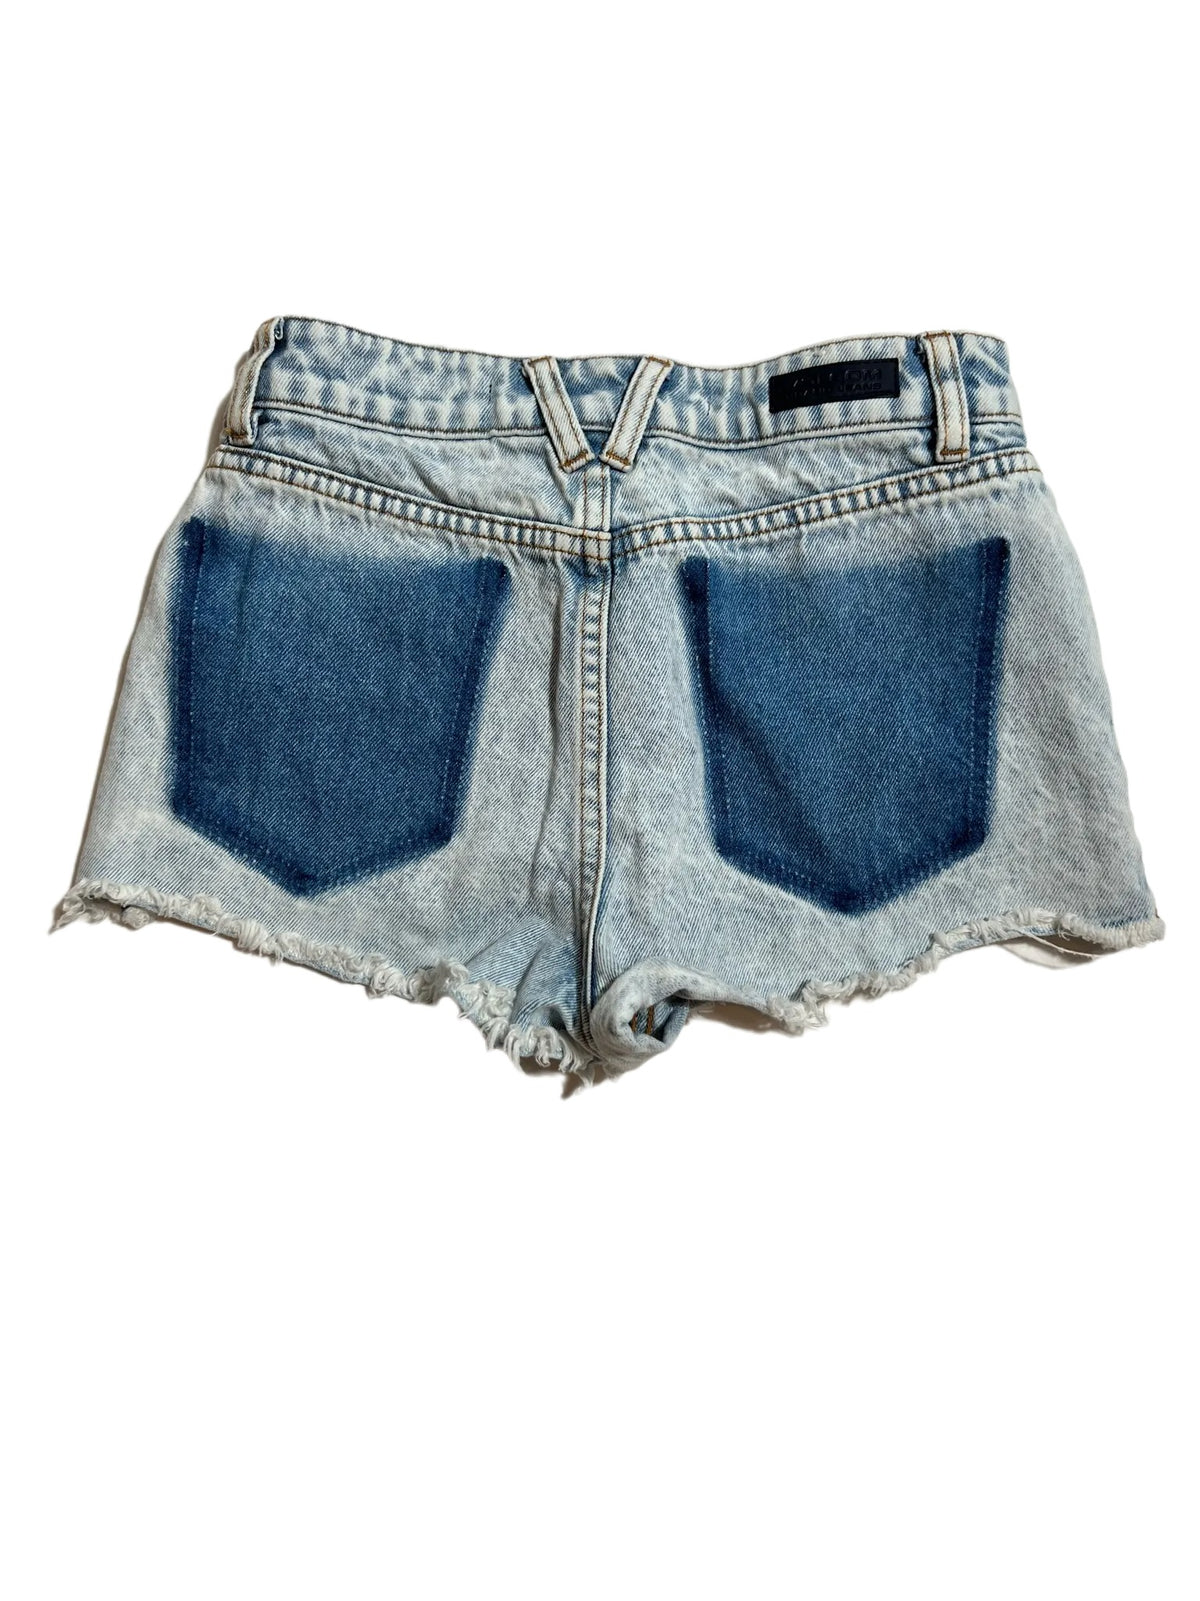 Volcom Brand- "Mid Rise" Light Washed Jean Shorts